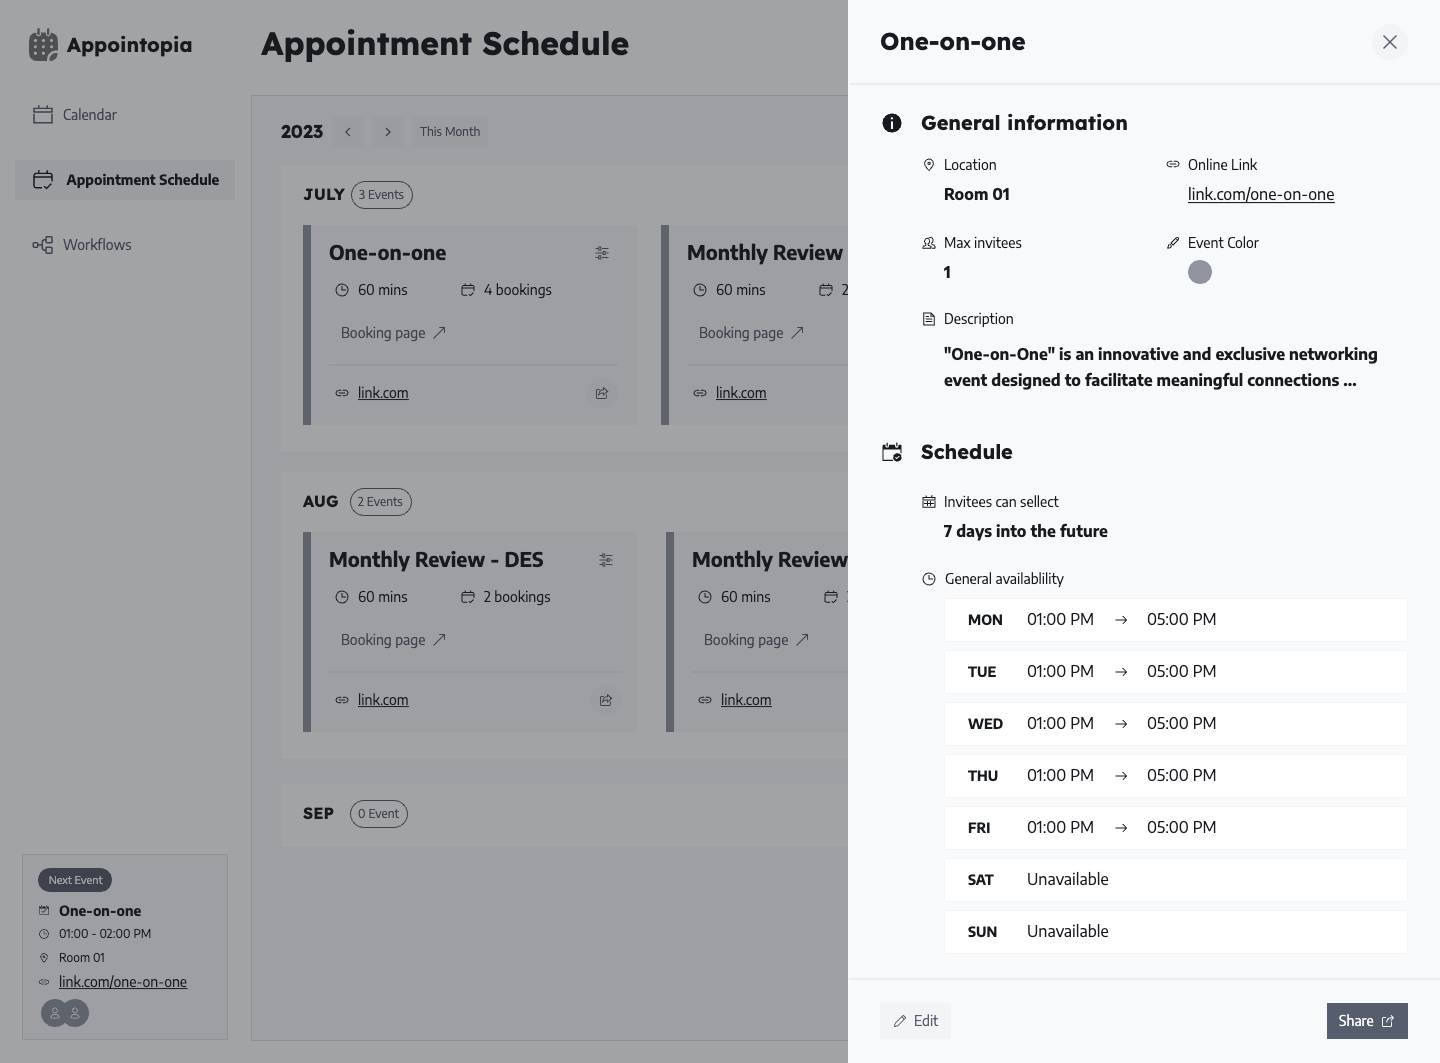 Create an appointment - Review information